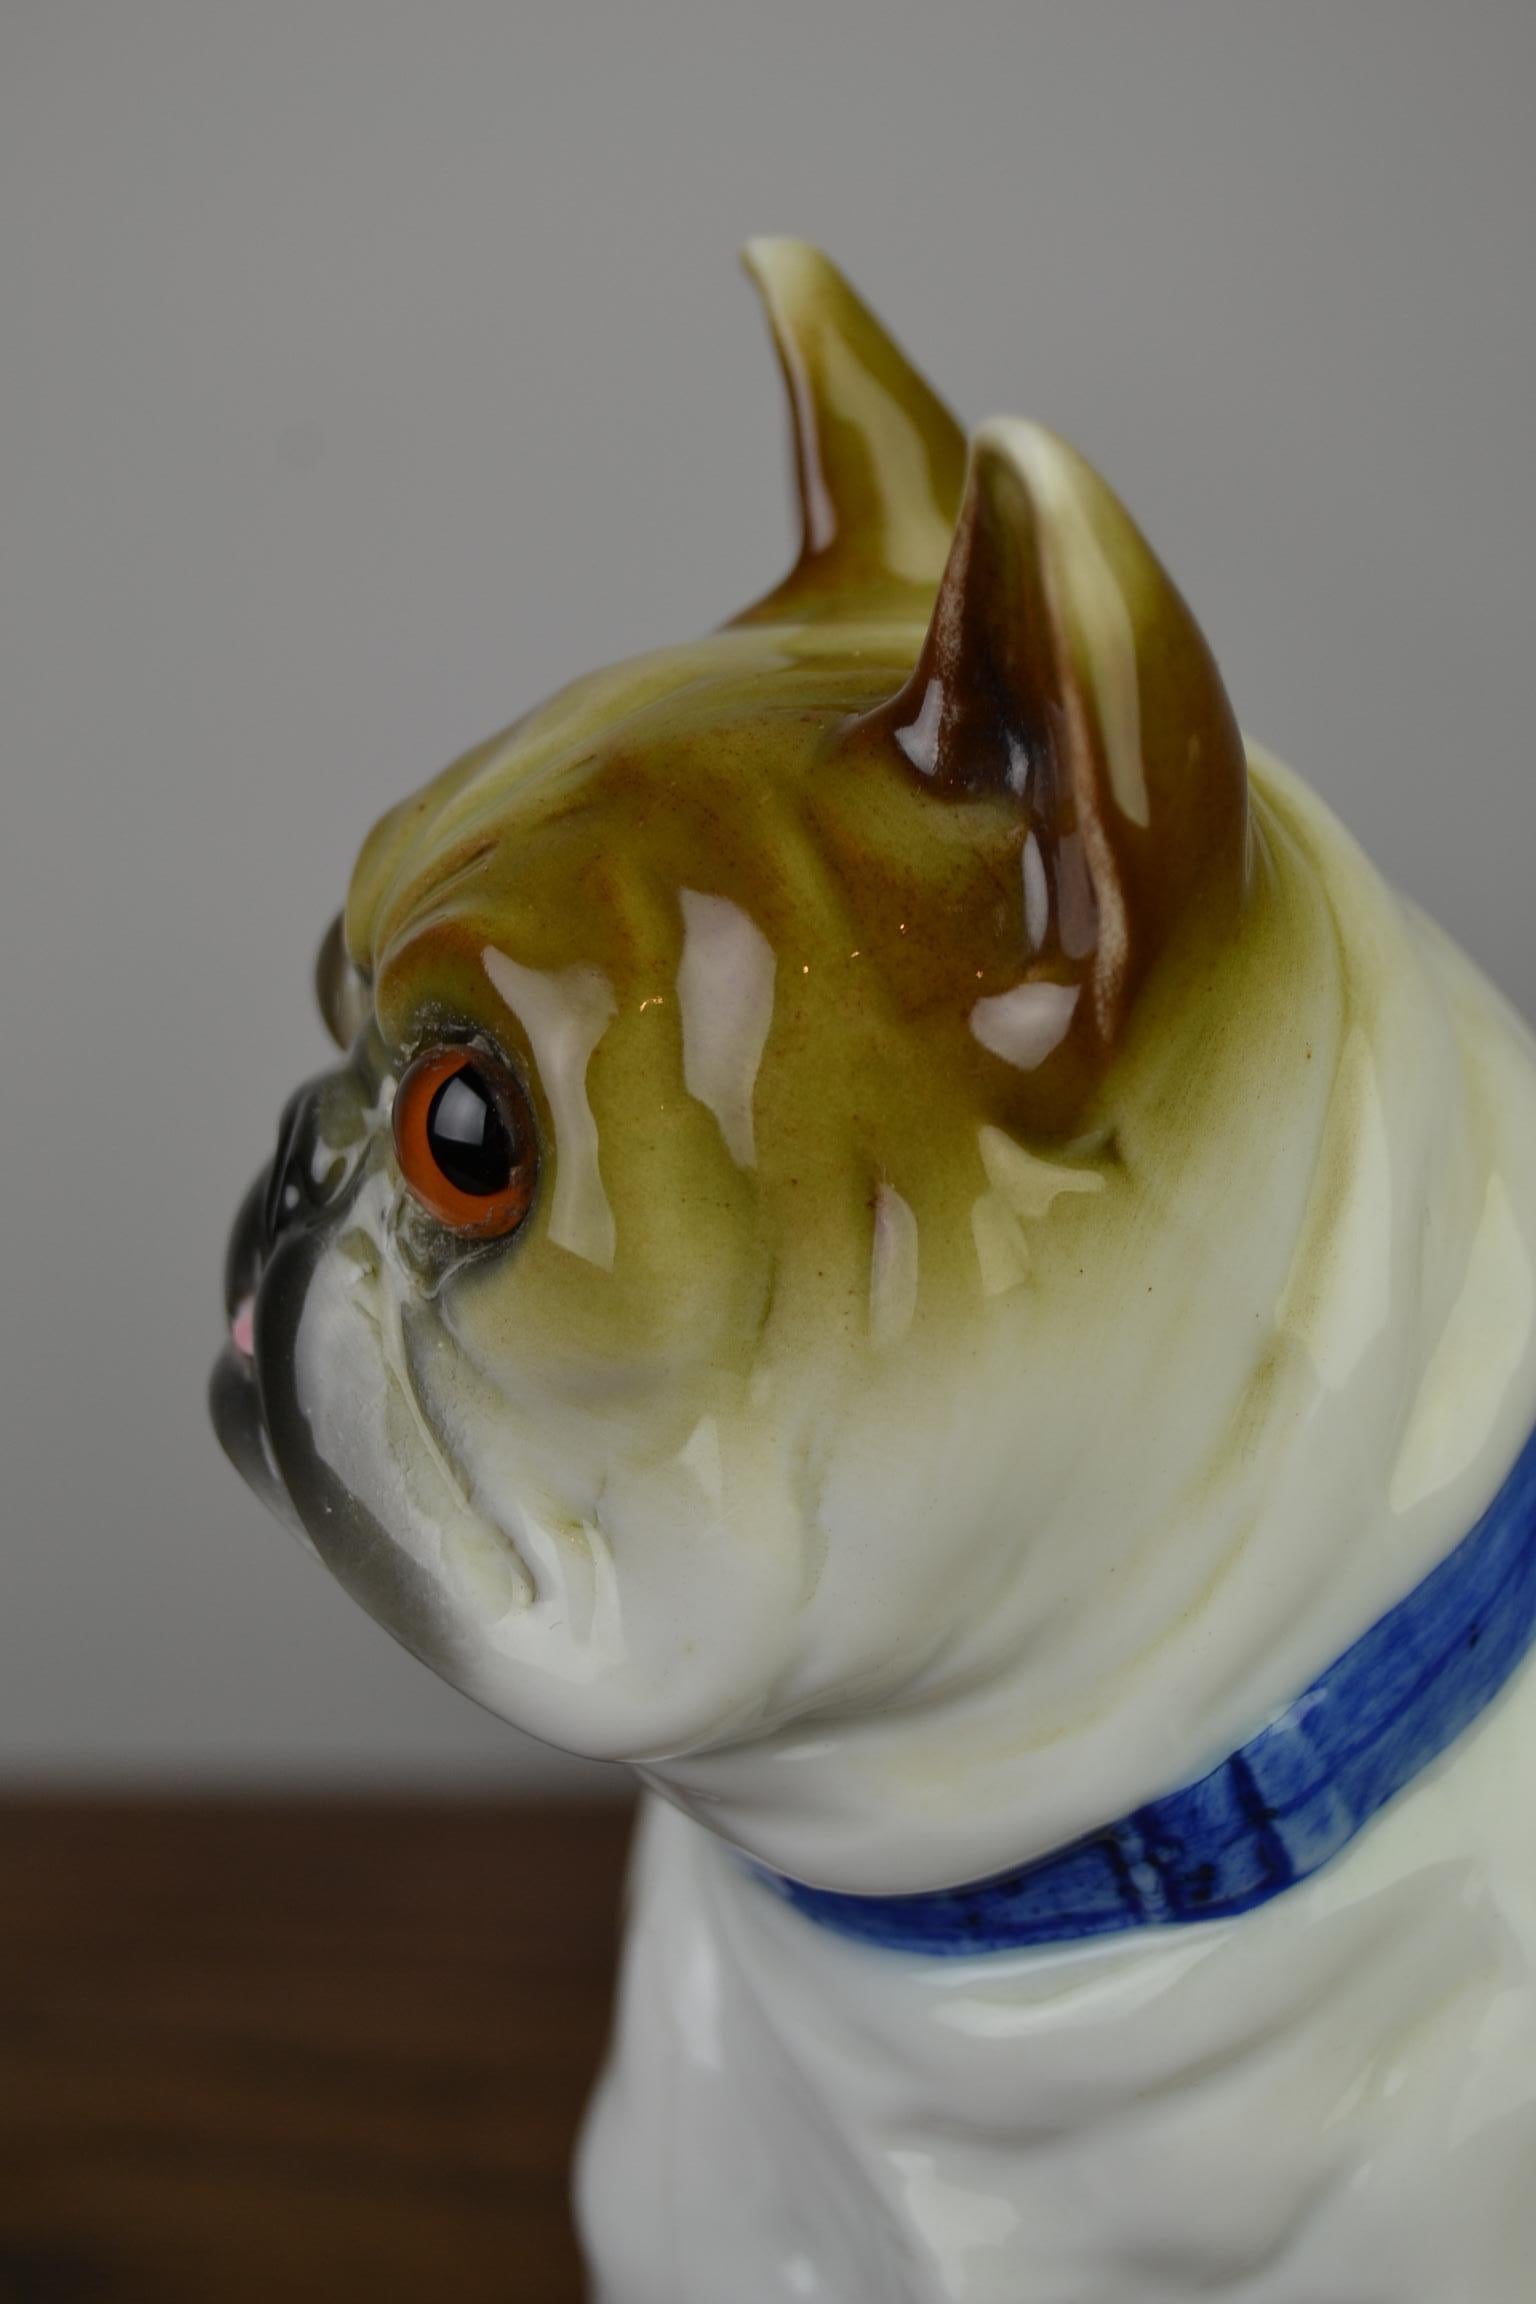 Art Deco Bulldog perfume lamp - Perfume light.
This figural porcelain table lamp, in the shape of a Bulldog dog,
has a blue collar and has his tongue out of his mouth.
Animal statue - Dog statue - Bulldog figurine - Art Deco dog statues -